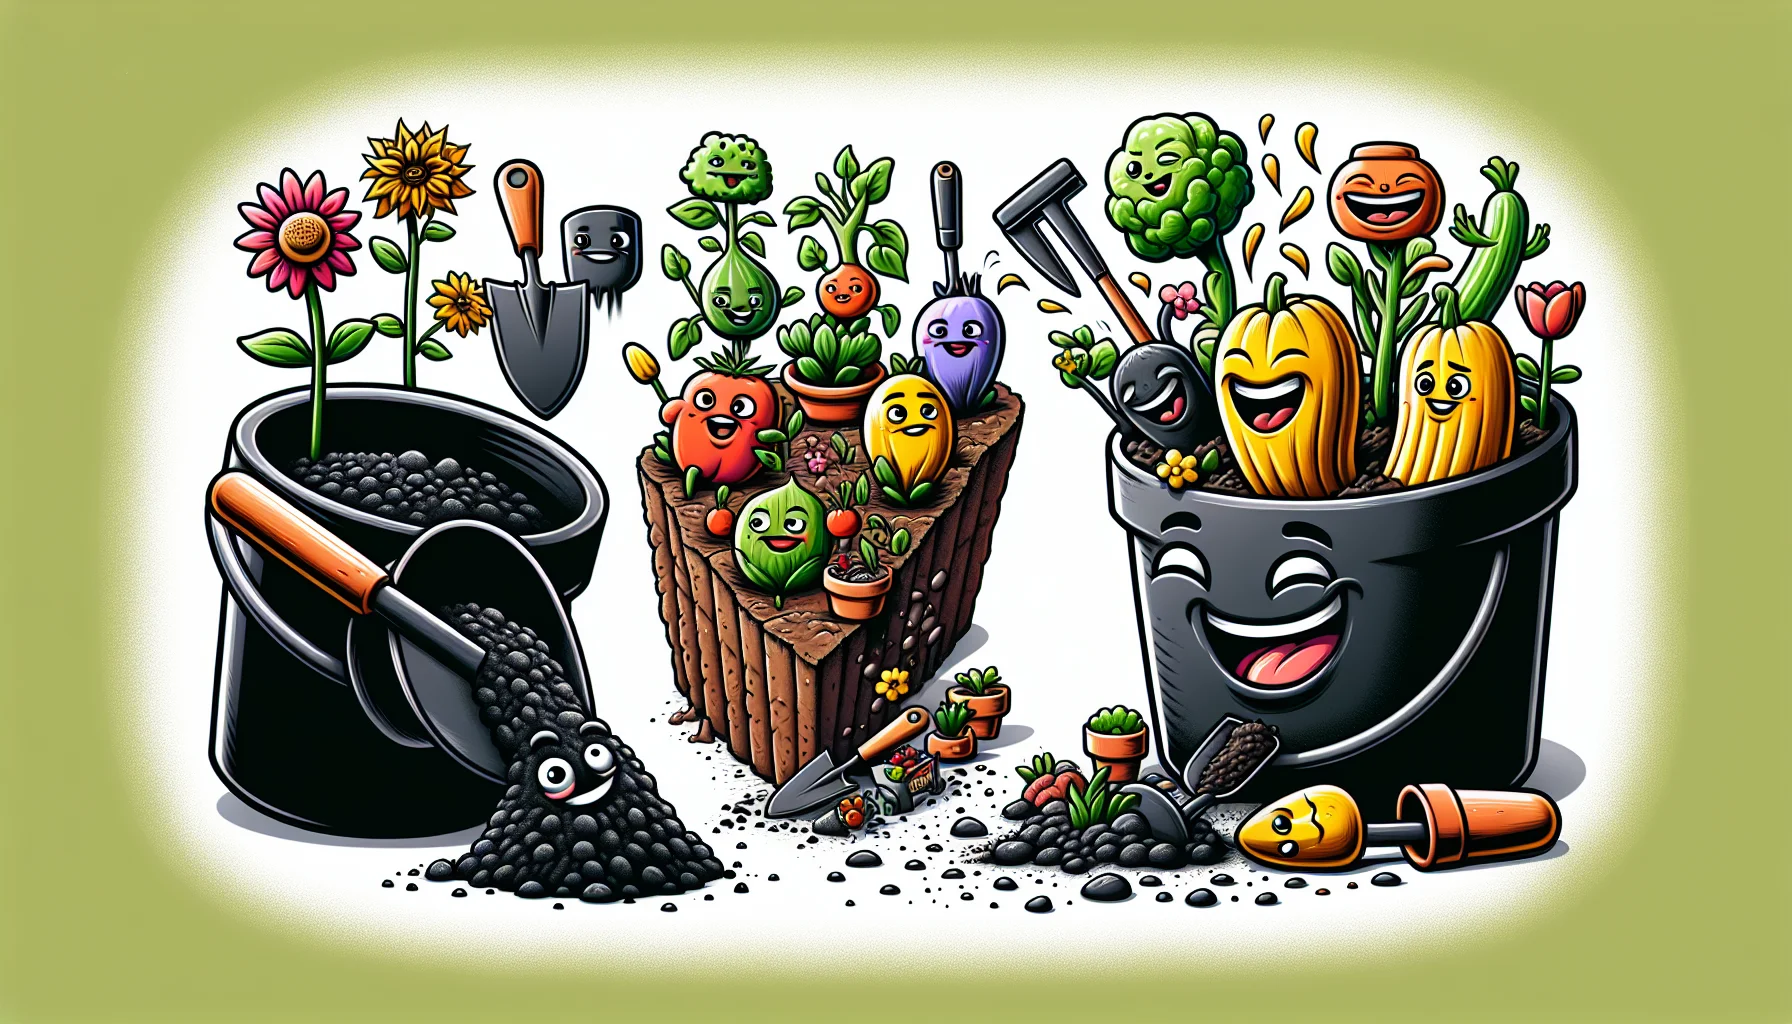 A humorous and engaging scene depicting the comparison between potting soil and garden soil. On the left, there's a black pot spilling potting soil, personified with an animated face, winking at a group of potted flowers that seem to be thriving. On the right, a patch of garden soil, also personified with a face, chuckles while an array of different vegetables grow vigorously out of it. Diverse garden tools are cheering in the background, which adds a playful vibe to the scene. This is designed with the aim of inspiring interest in gardening.